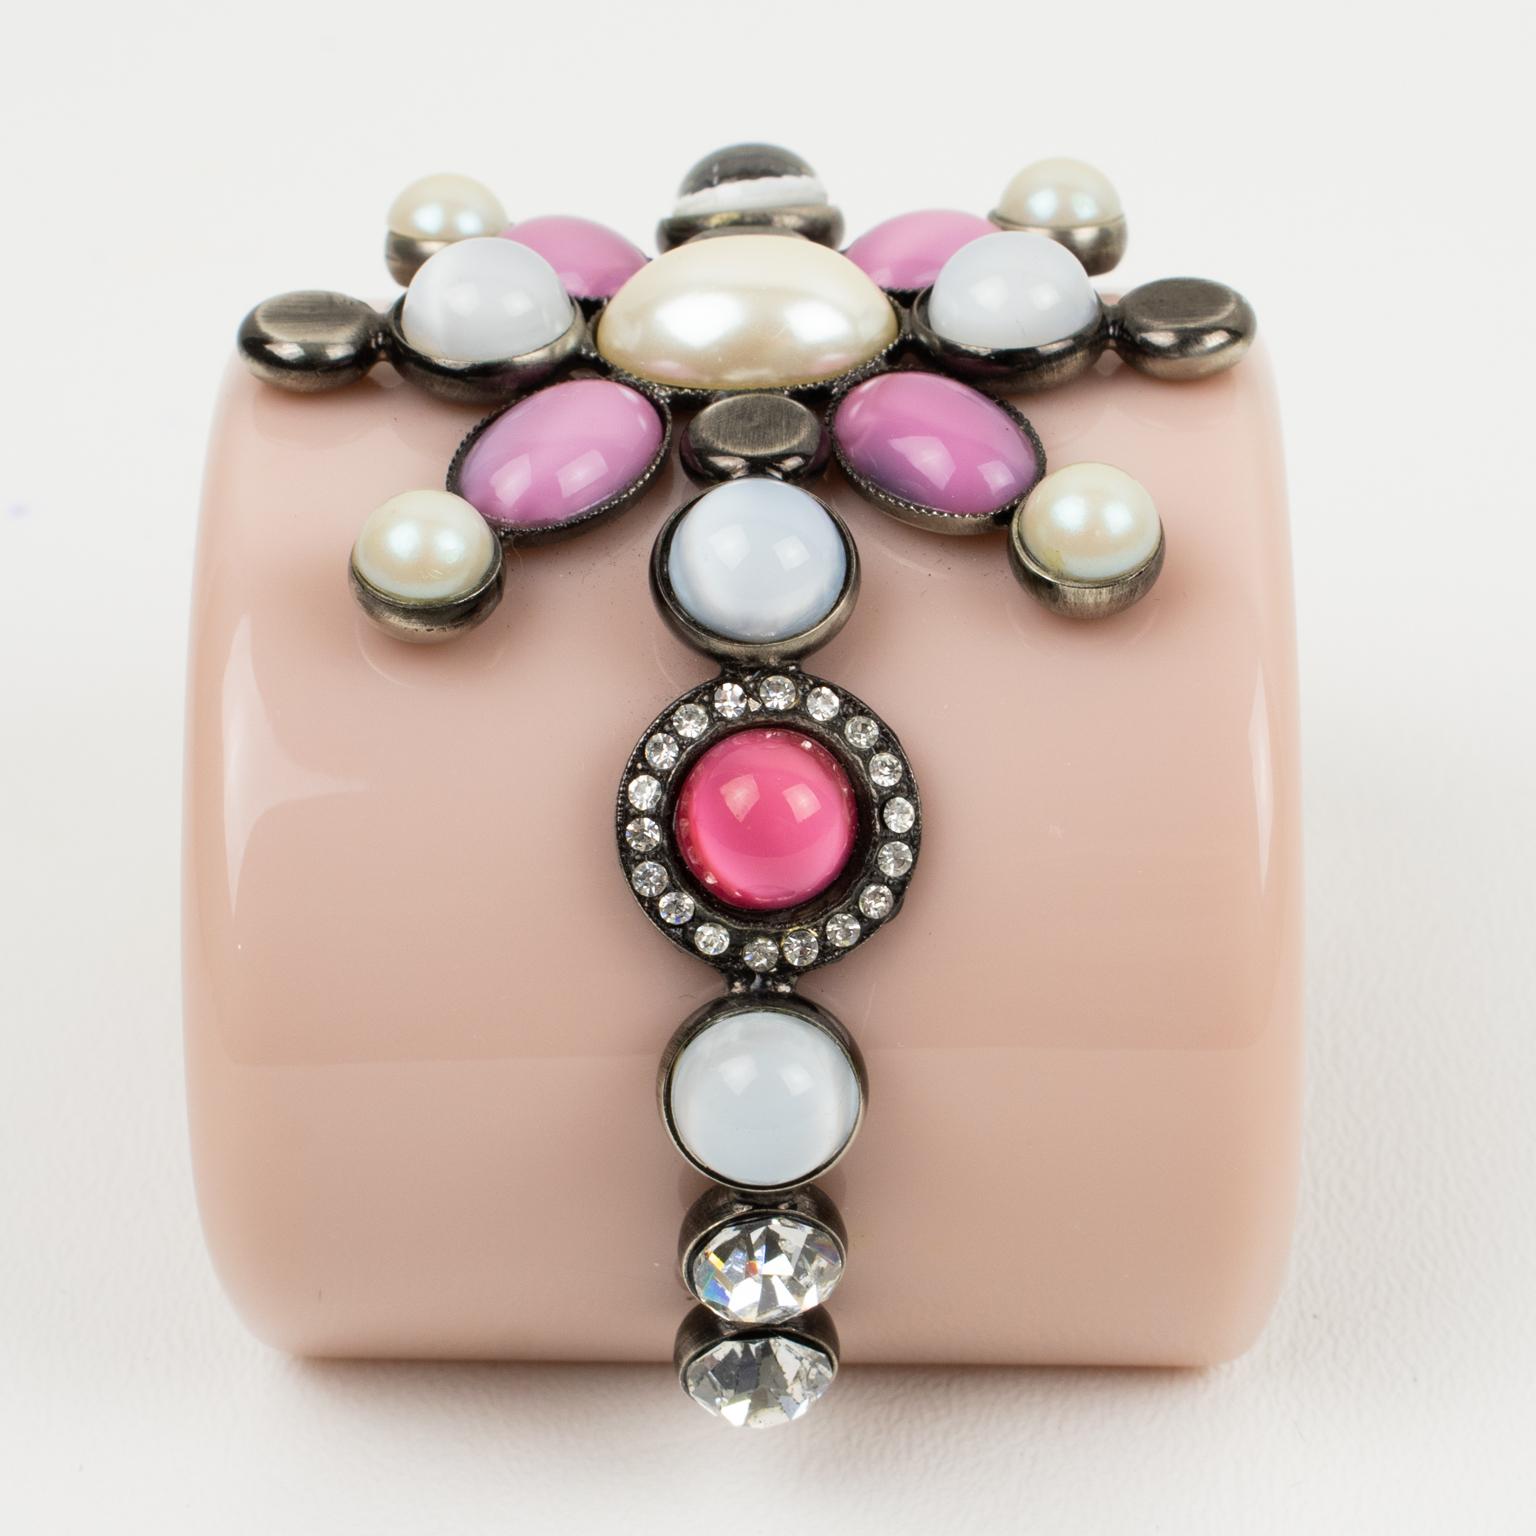 Women's or Men's Emilio Pucci Jeweled Pale Pink Resin Bracelet Bangle For Sale